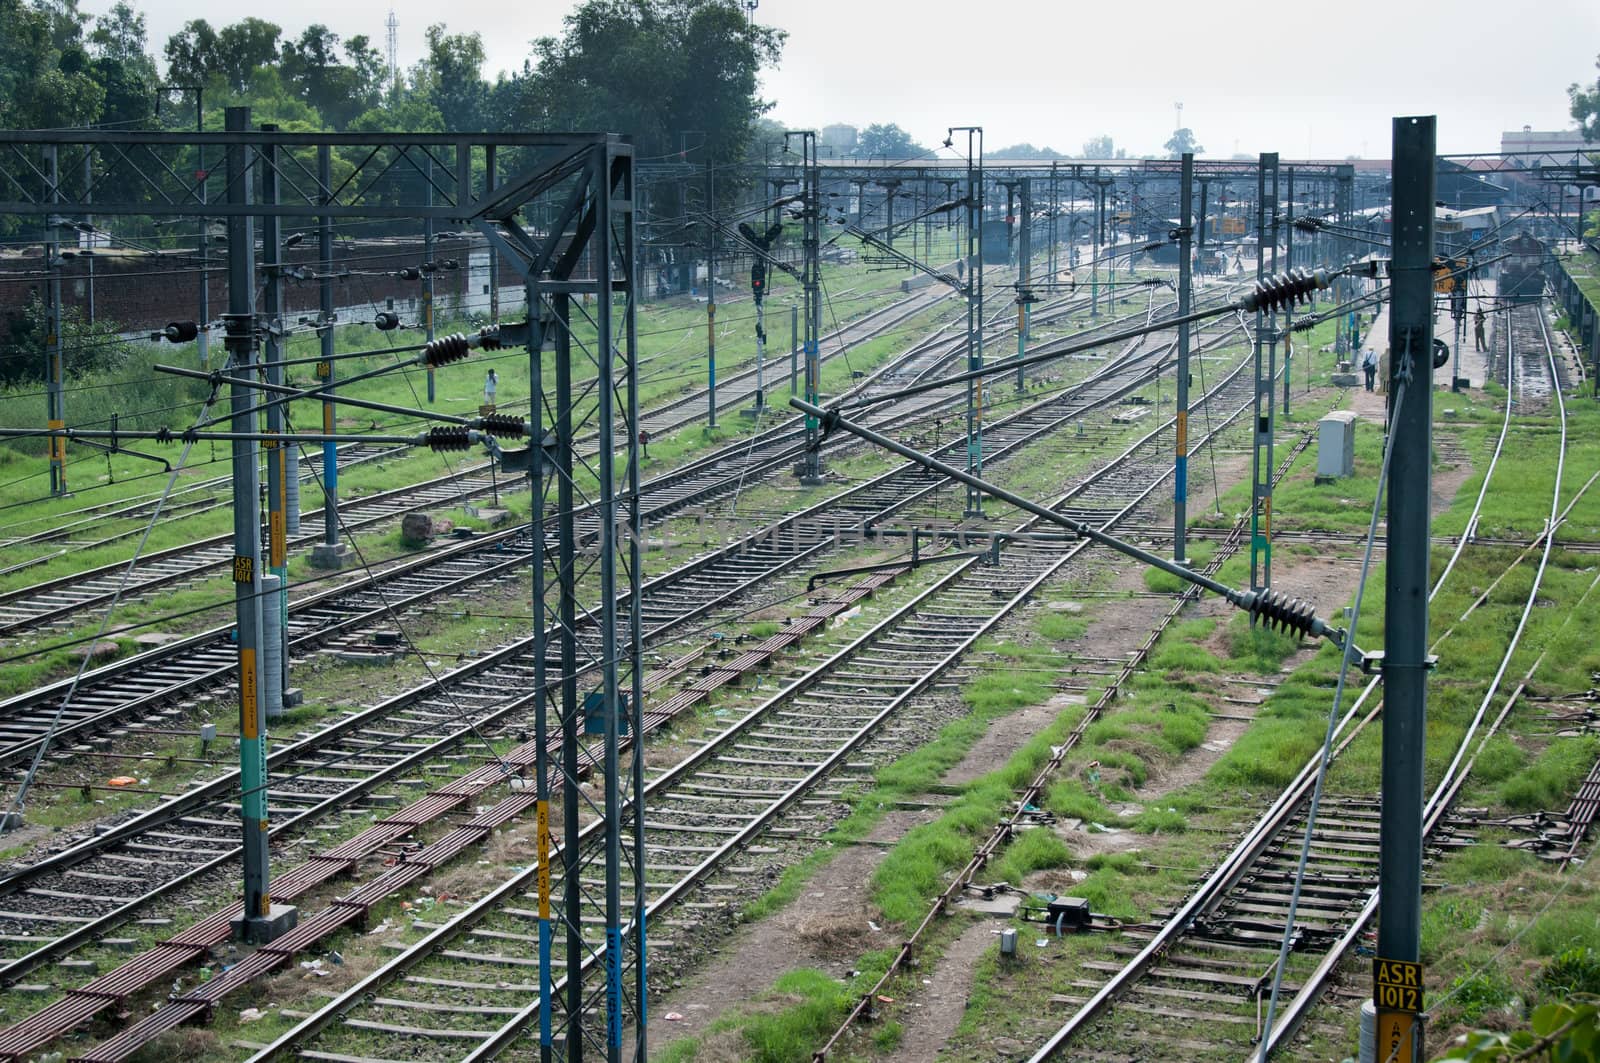 Amritsar, India - August 26, 2011: Tracks of the great Indian railway transport system on the station